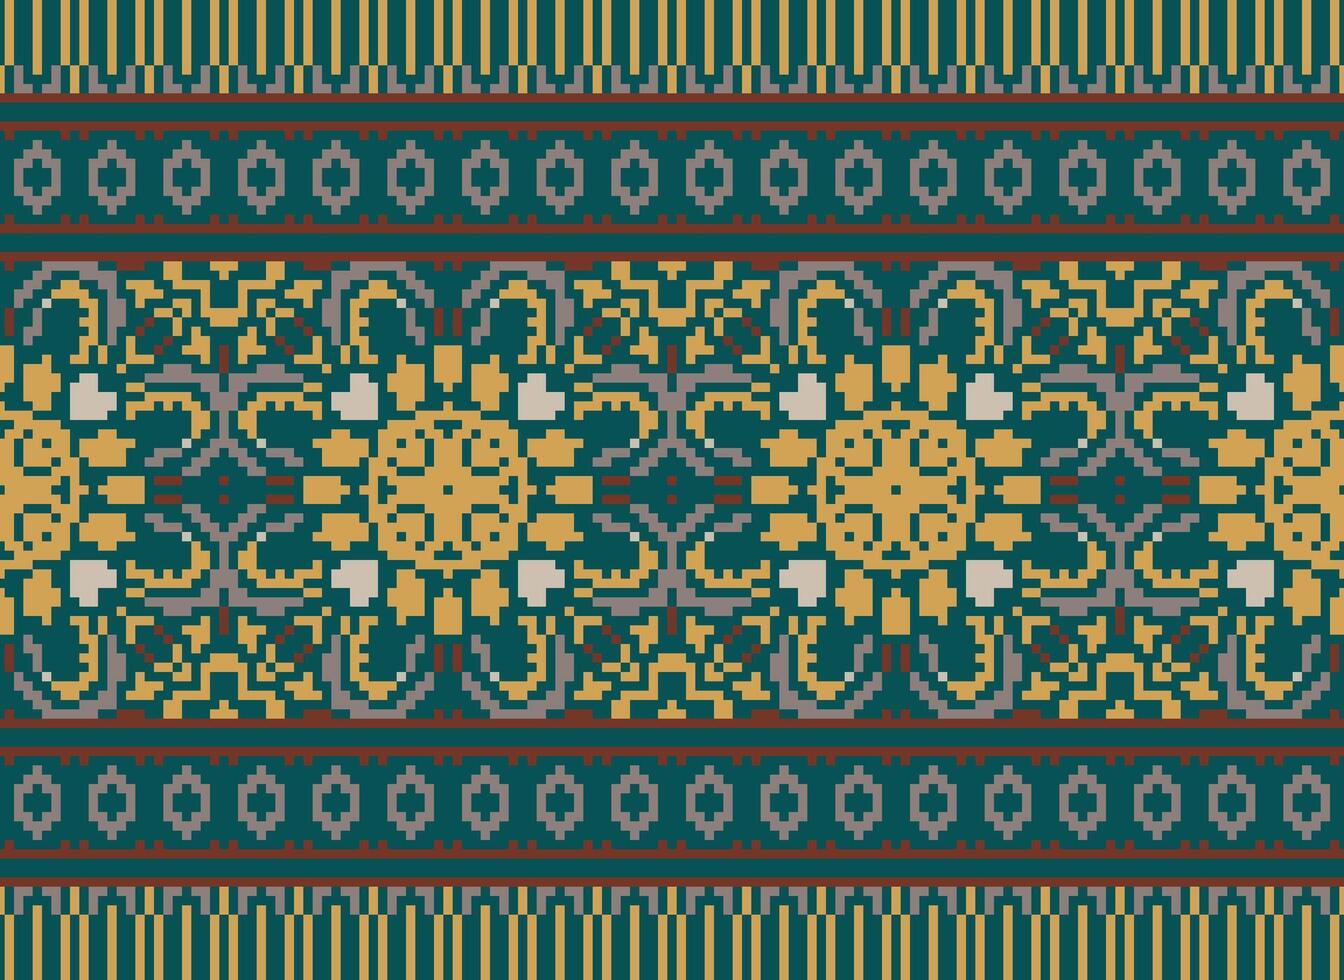 flower embroidery on brown background. ikat and cross stitch geometric seamless pattern ethnic oriental traditional. Aztec style illustration design for carpet, wallpaper, clothing, wrapping, batik. vector